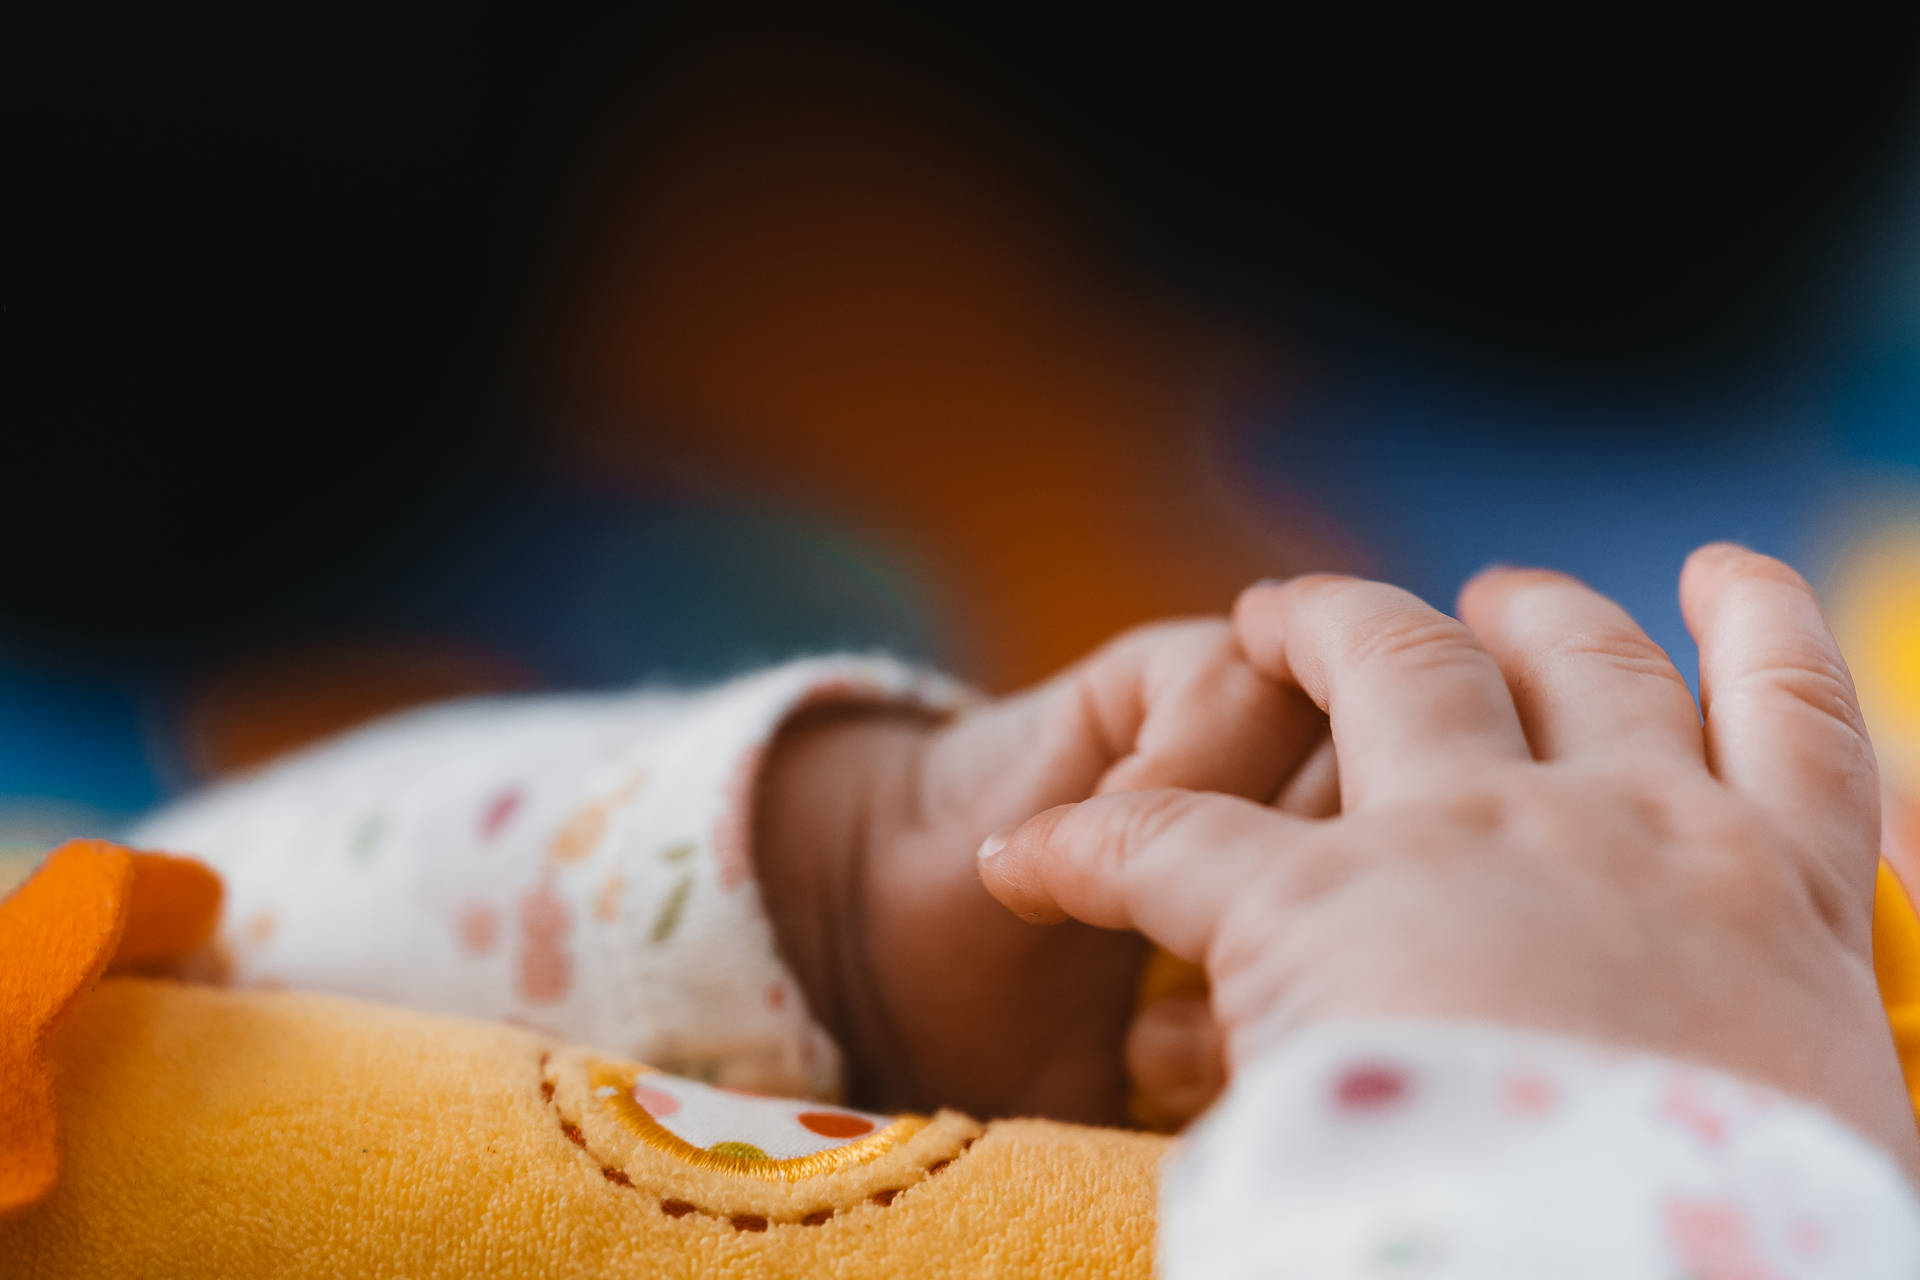 Resting Hands Of Baby Hd Background